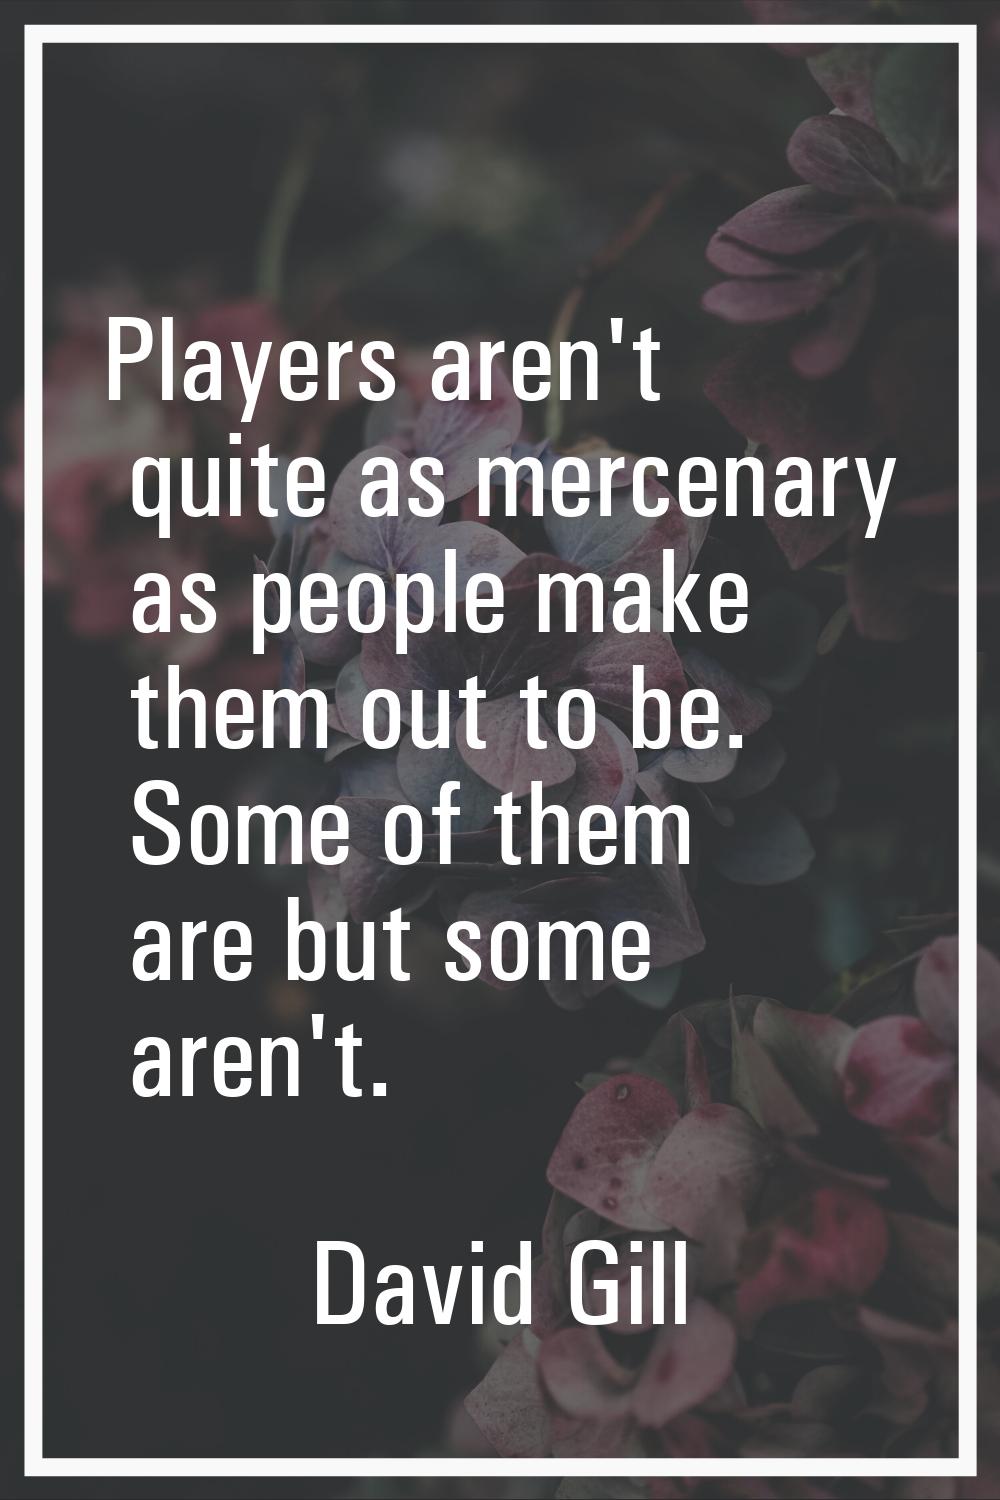 Players aren't quite as mercenary as people make them out to be. Some of them are but some aren't.